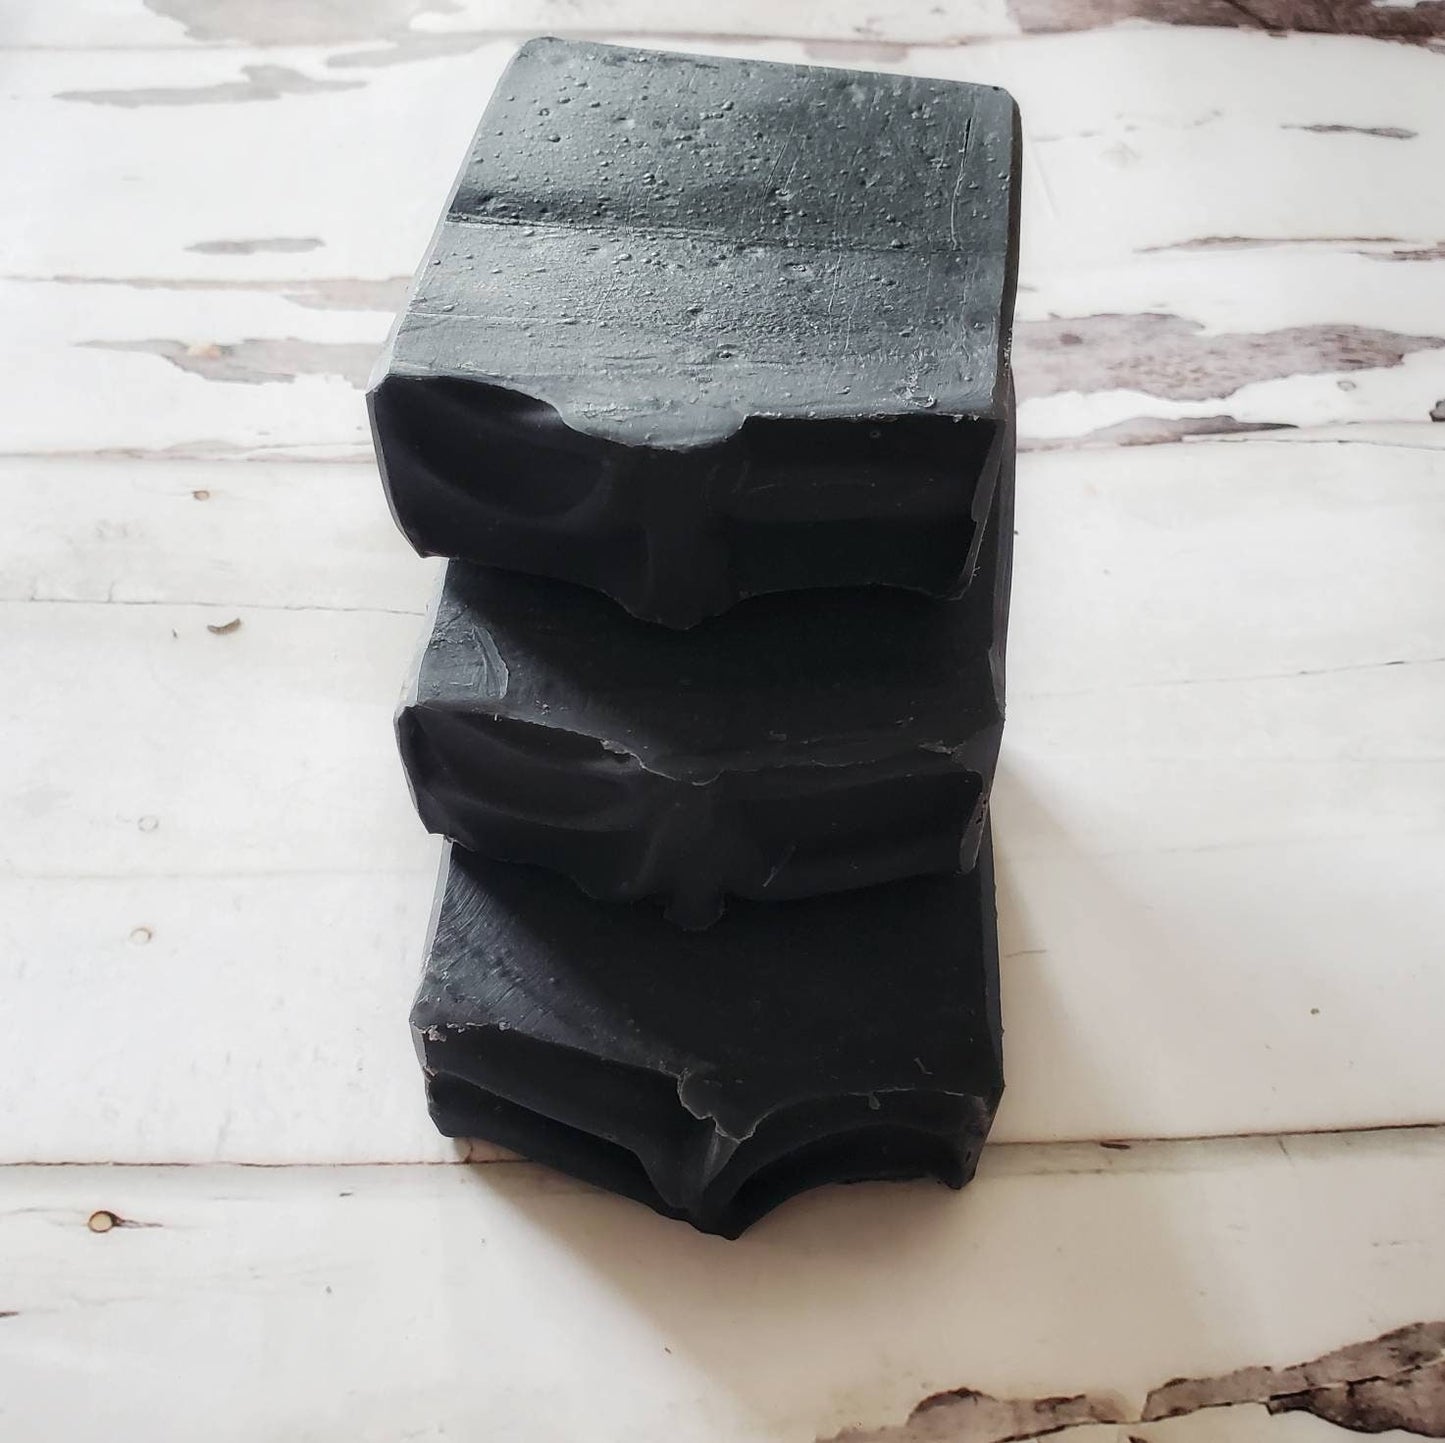 CLEAR | Activated Charcoal & Tea Tree Soap | Organic Handmade Brightening Beauty Bar | Aromatherapy | Vegan Skincare | Shea Butter Soap